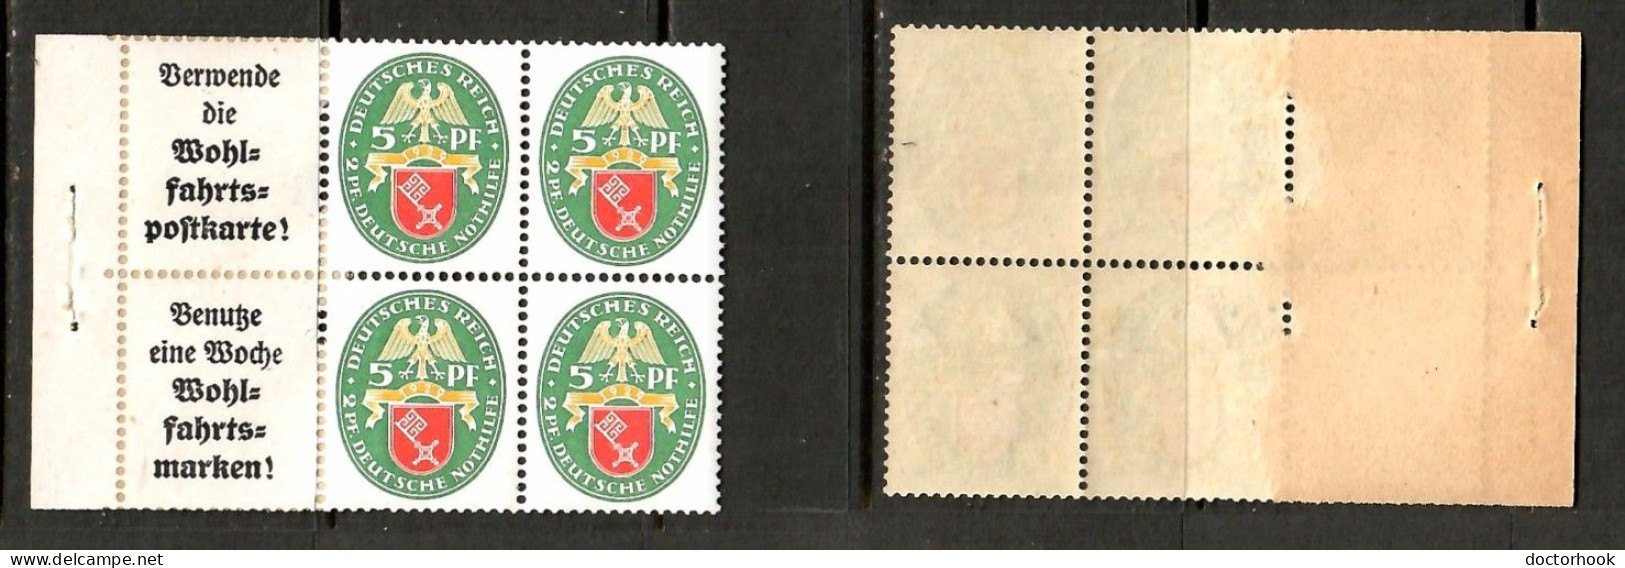 GERMANY   Scott # B 28* MINT OG BOOKLET PANE Of 4 + 2 LABELS (PAPER ADHESION)  (CONDITION AS PER SCAN) (LG-1764) - Cuadernillos & Se-tenant